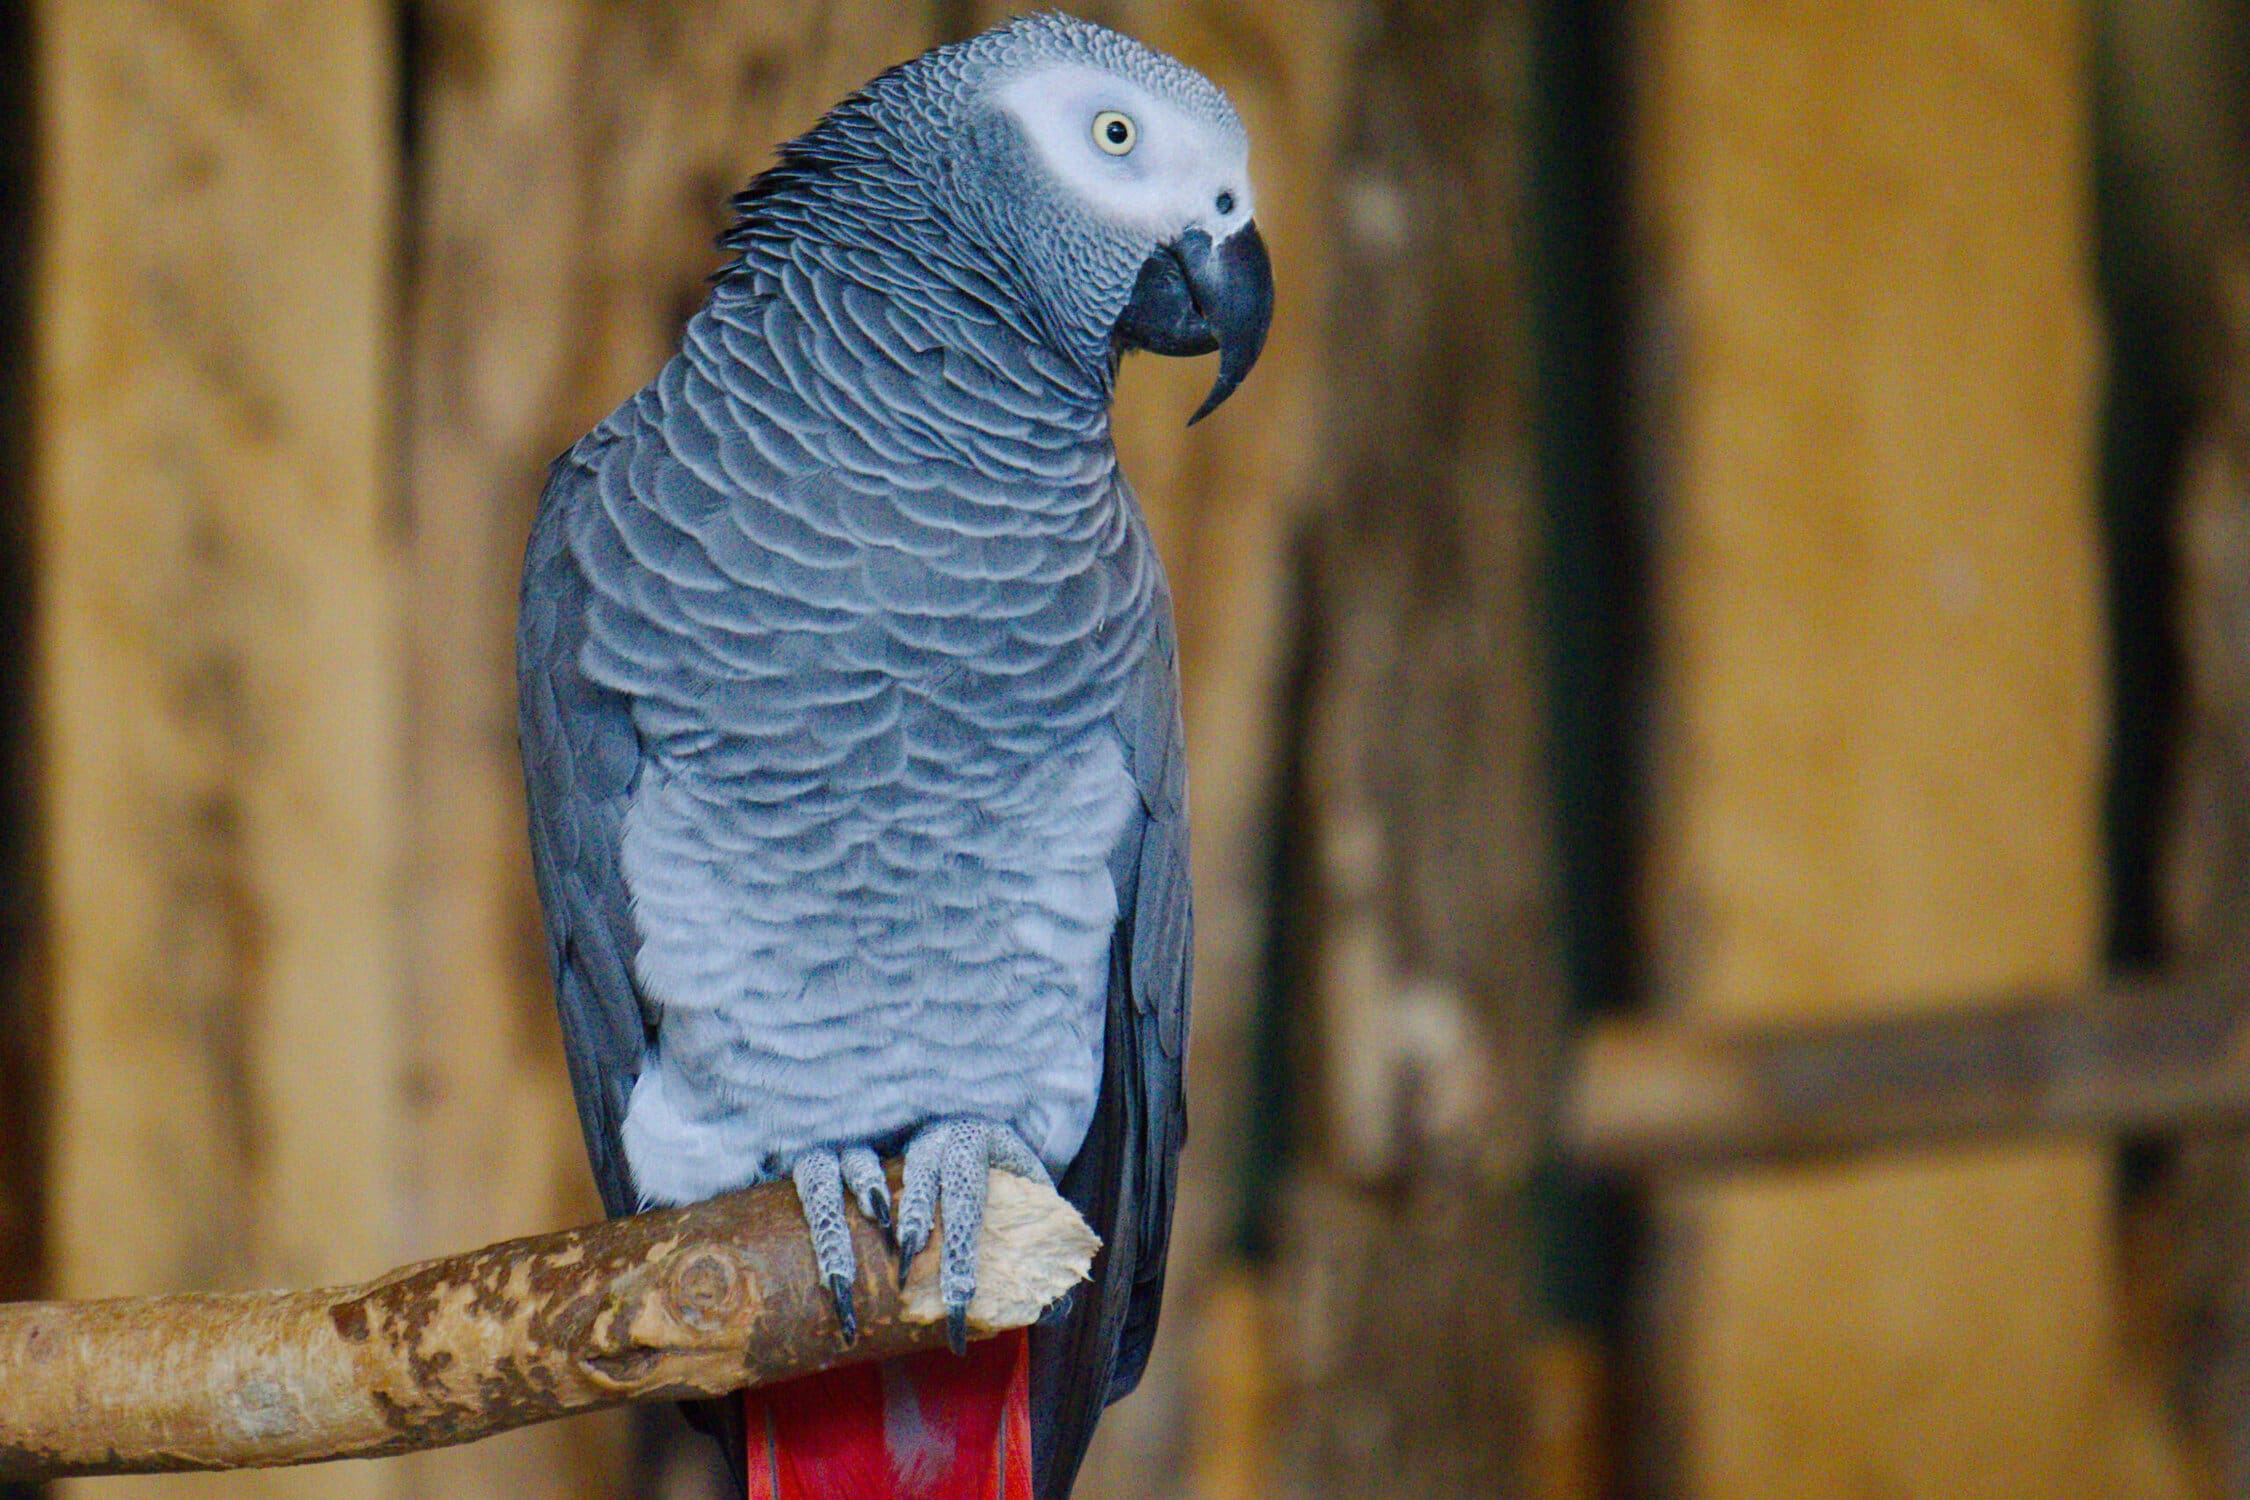 Species Highlight: The African Grey Parrot